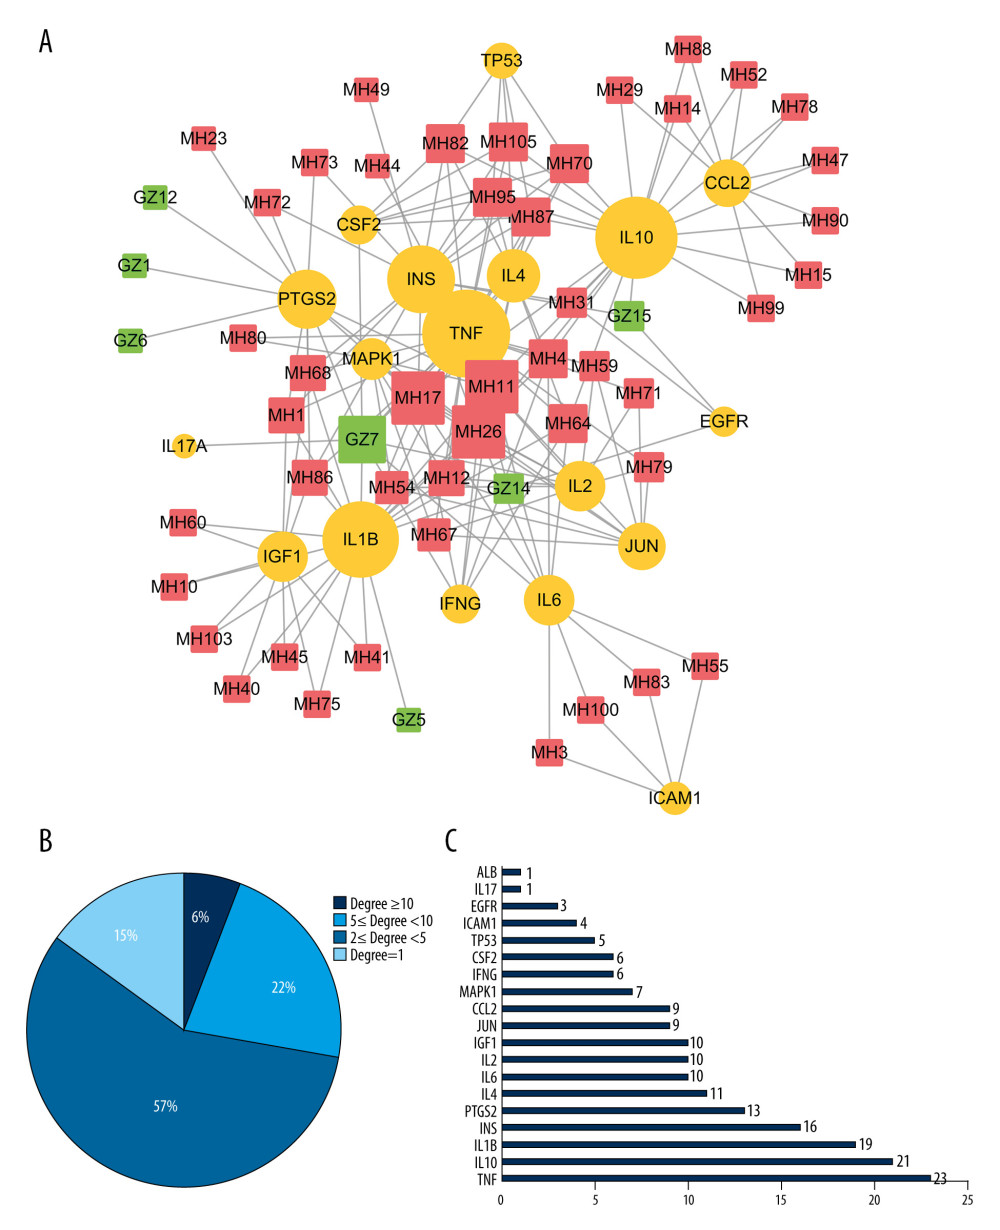 (A) Construction of the core network of active ingredients of Ephedrae Herba-Cinnamomi Ramulus couplet medicines (MGCM) and their targets in treating psoriasis, and the statistical analysis of the degree of each (B) ingredient and (C) target in the network. All nodes were sorted and calculated according to the degree of freedom, and the node size in the network was associated with the degree.